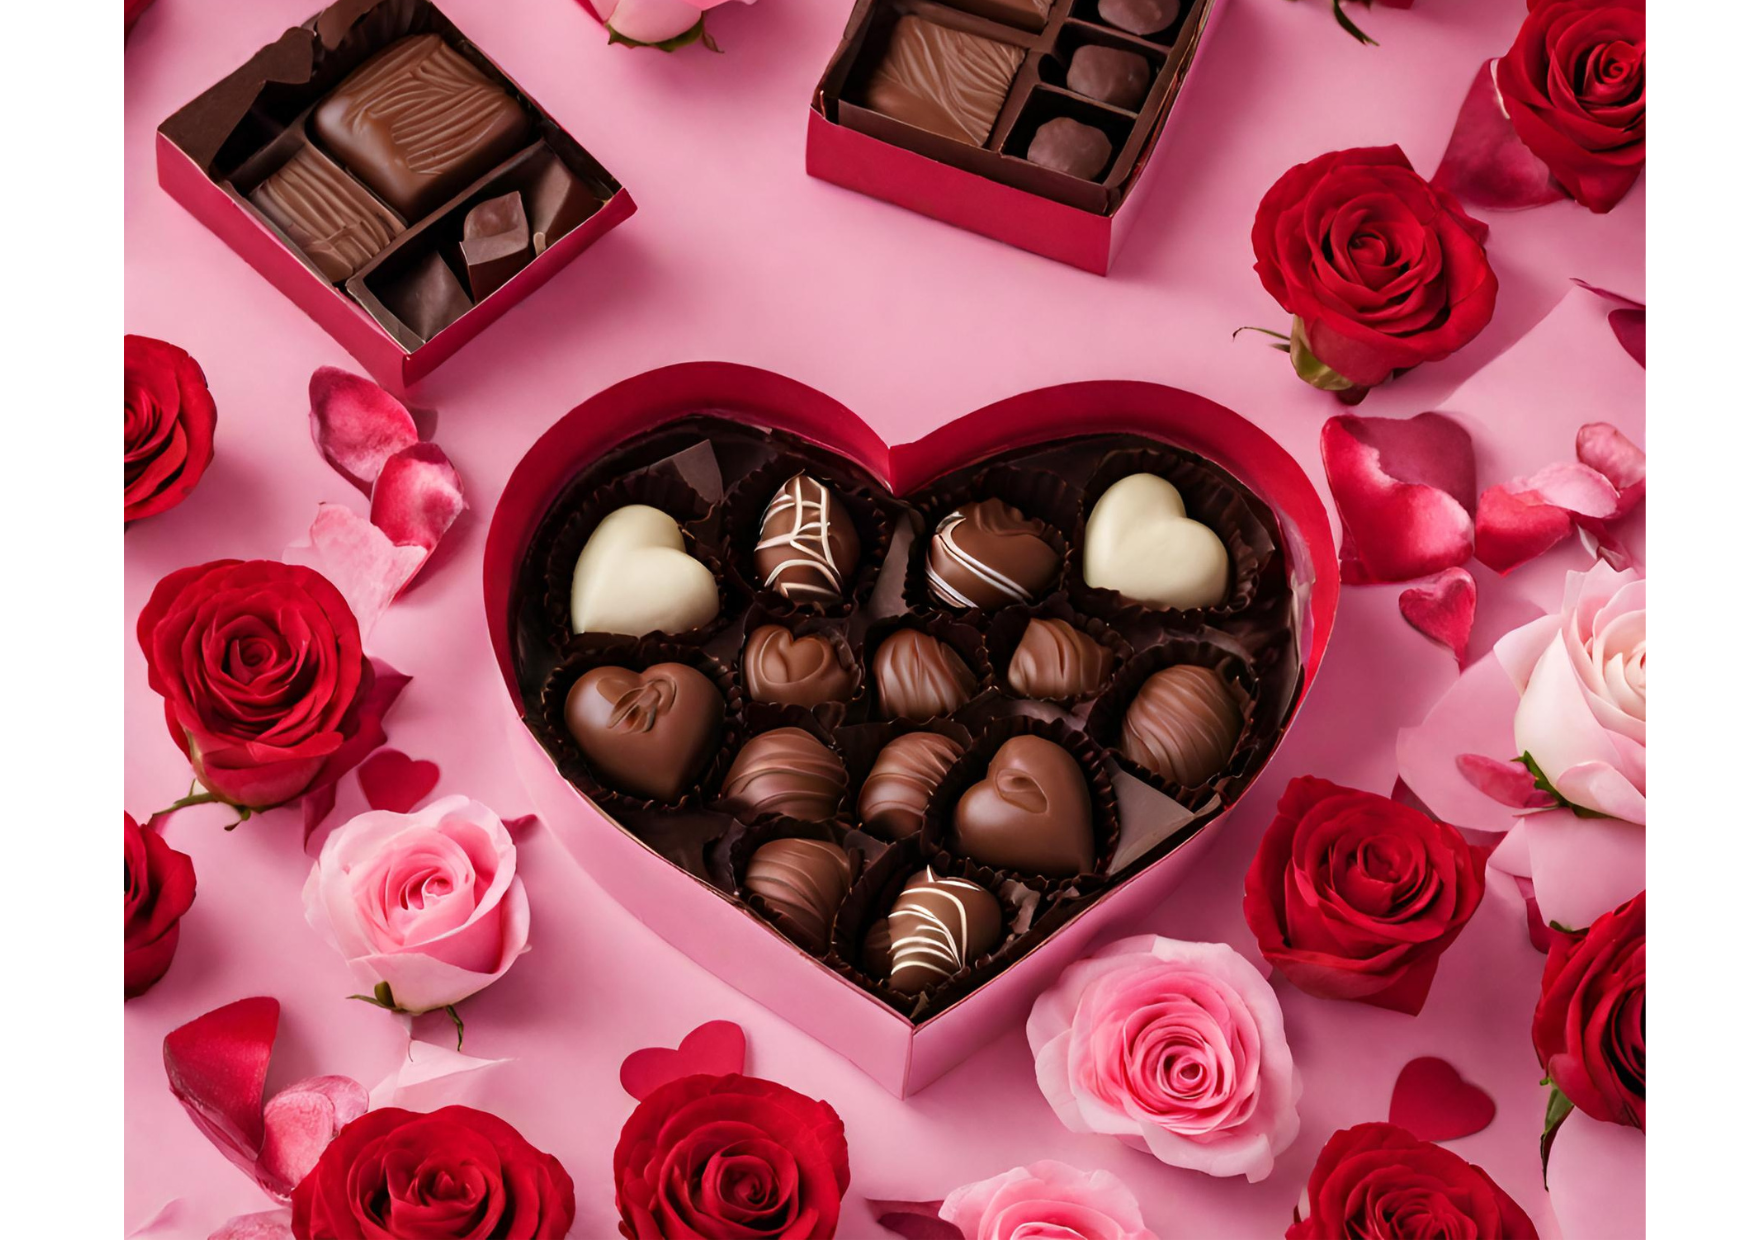 Custom Made Chocolate for Valentine's Day Gifts - Printleaf's Blog for  Design and Printing Solutions